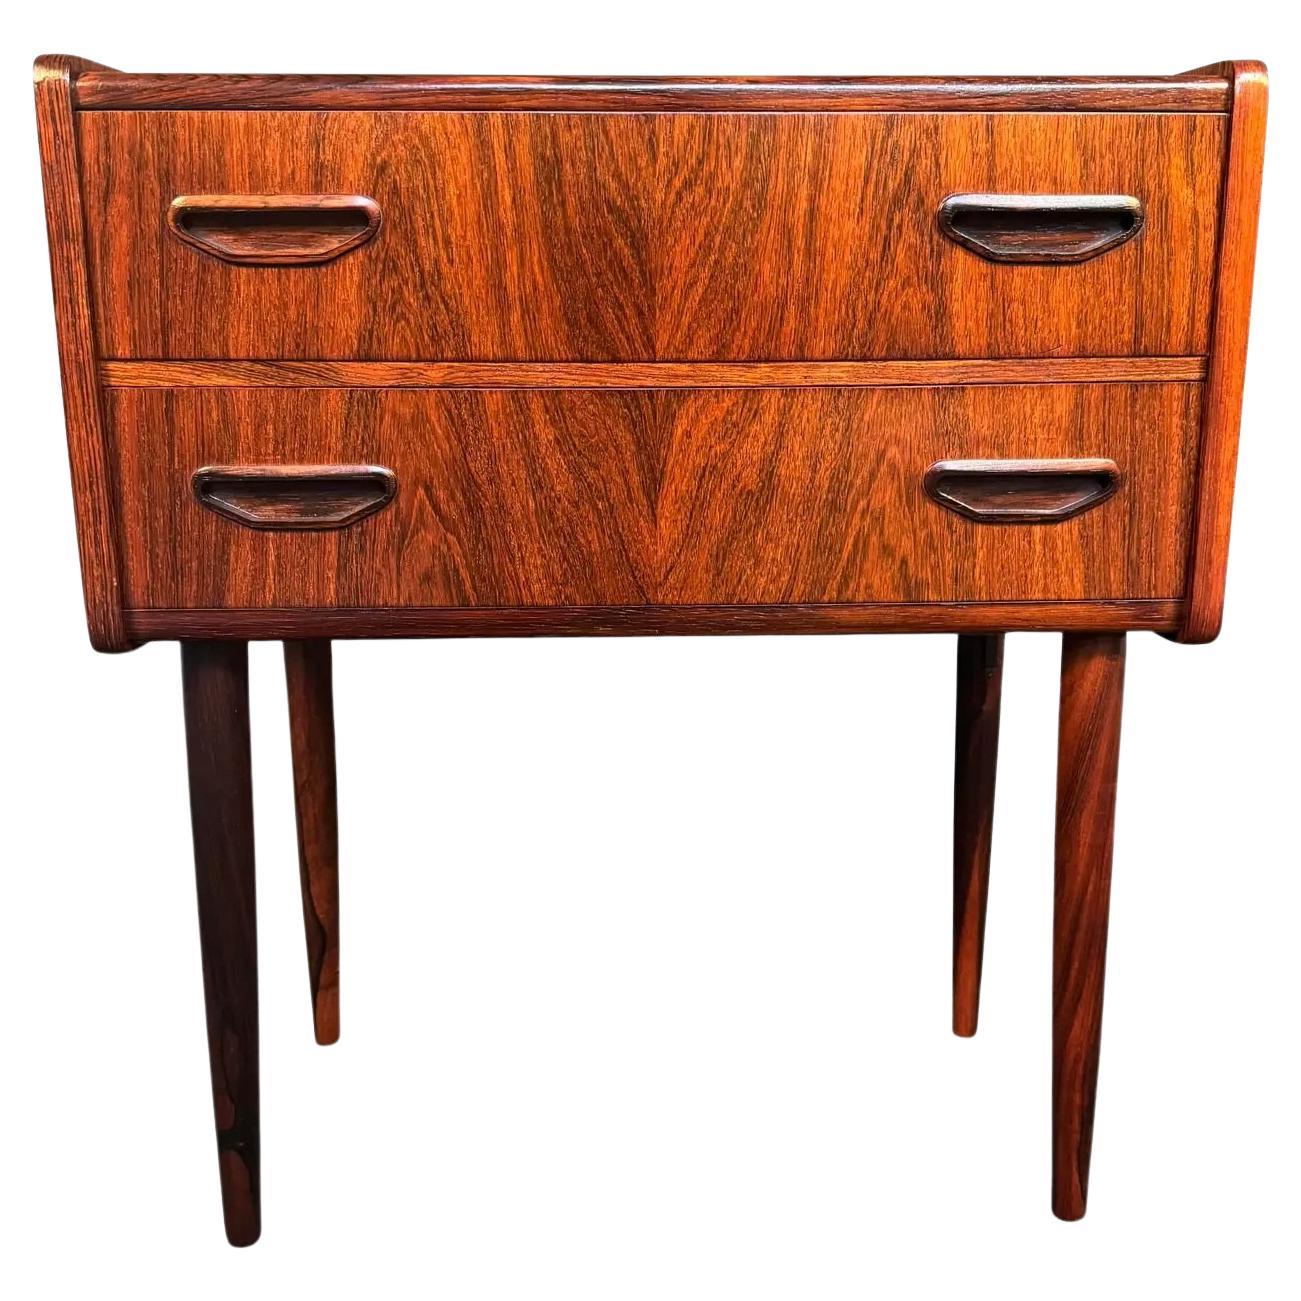 Vintage Danish Mid Century Modern Rosewood Nightstand - Entry Chest For Sale